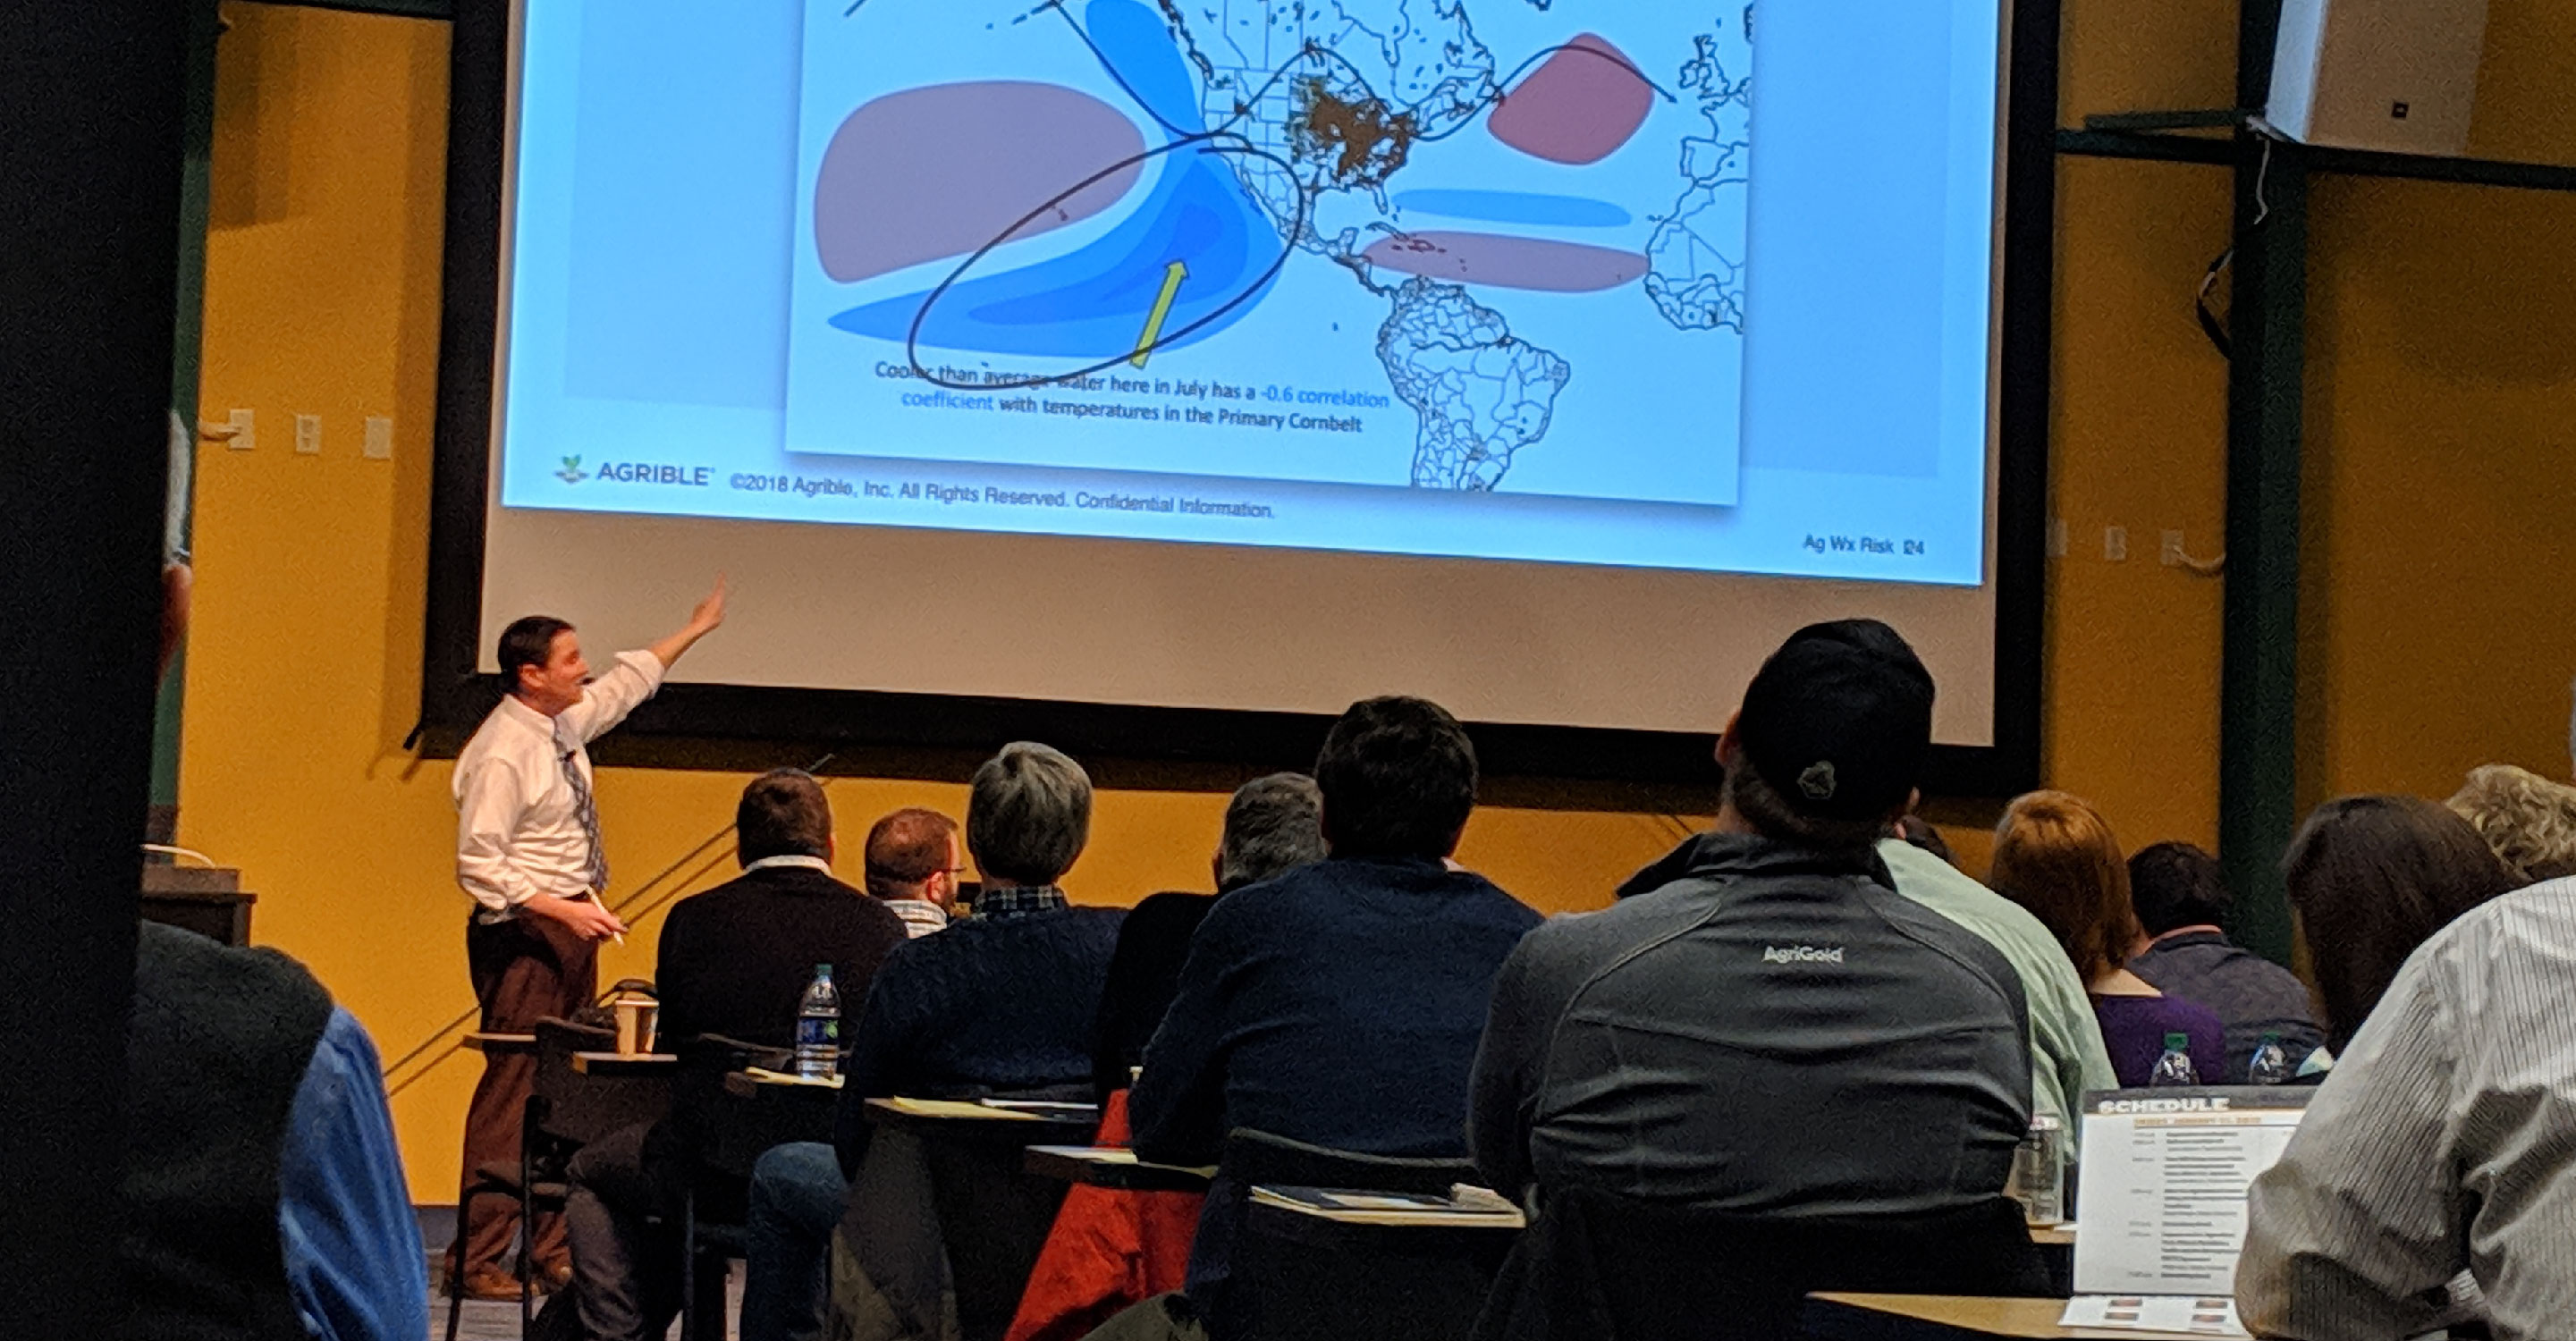 Image of a person giving a presentation to an audience.